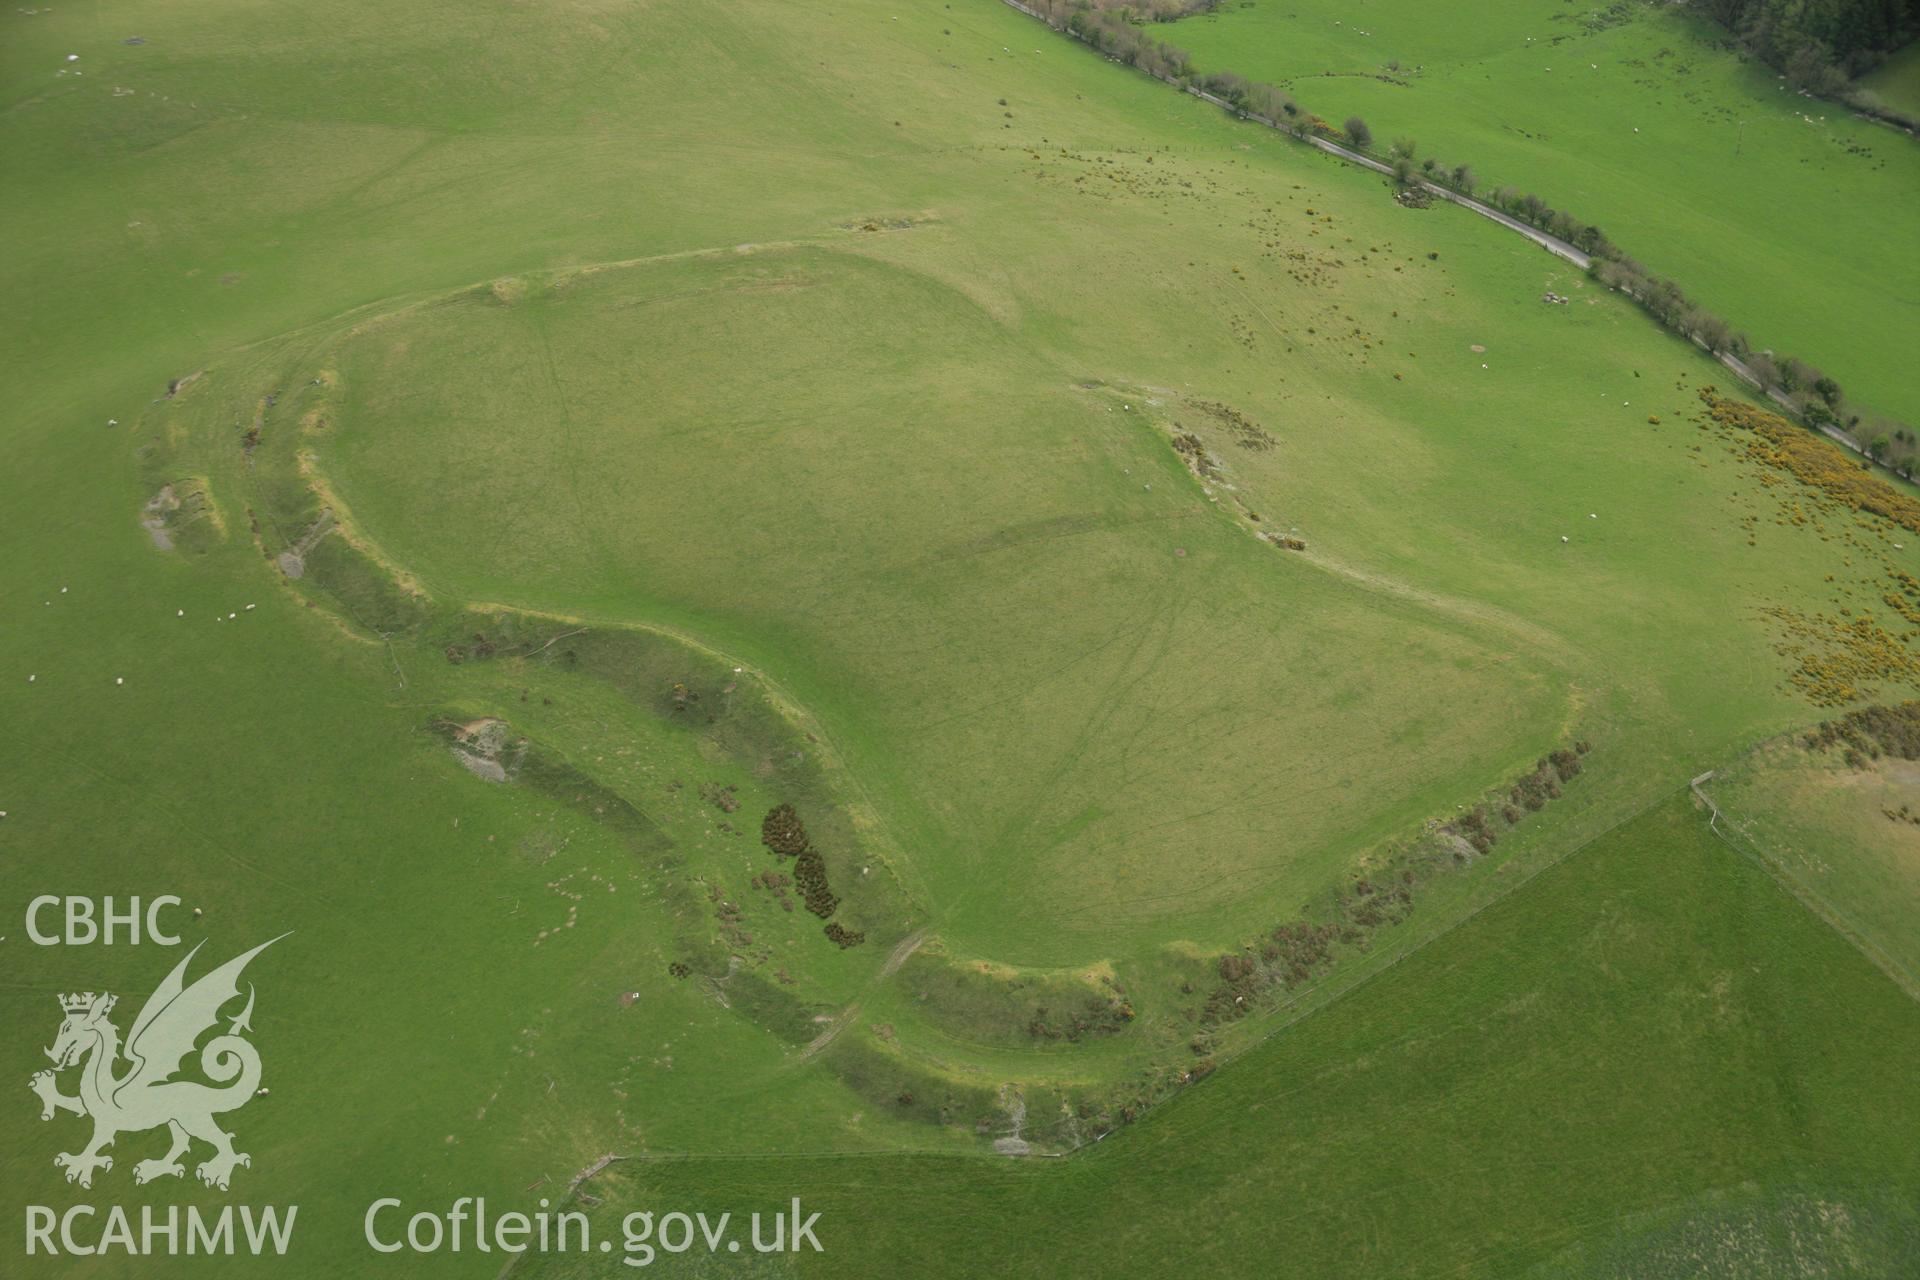 RCAHMW colour oblique aerial photograph of Gaer Fawr. Taken on 17 April 2007 by Toby Driver